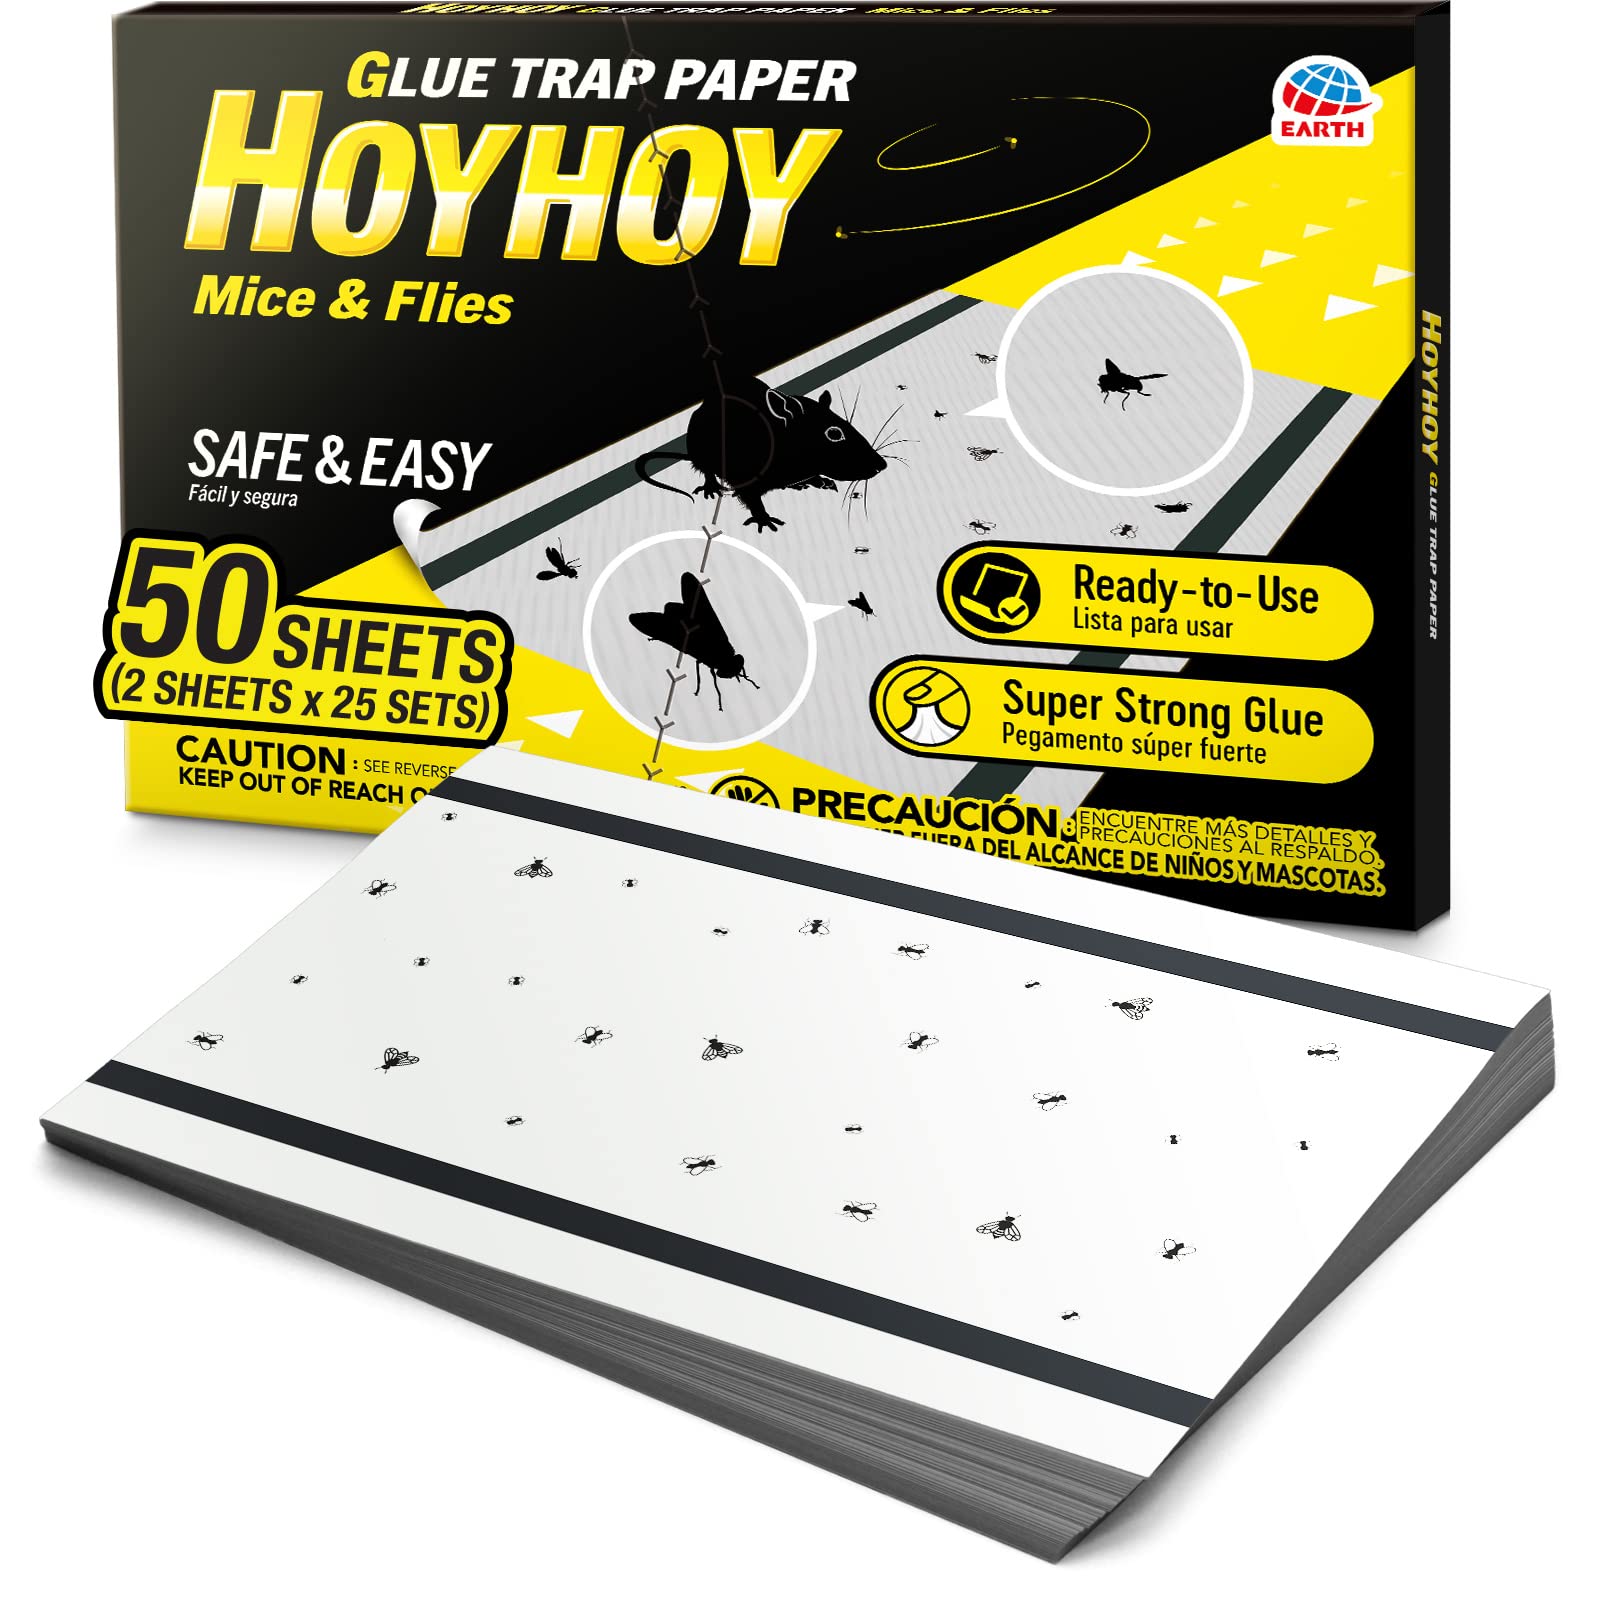 HOY HOY Jumbo Size Rat & Mouse Indoor / Outdoor Glue Trap